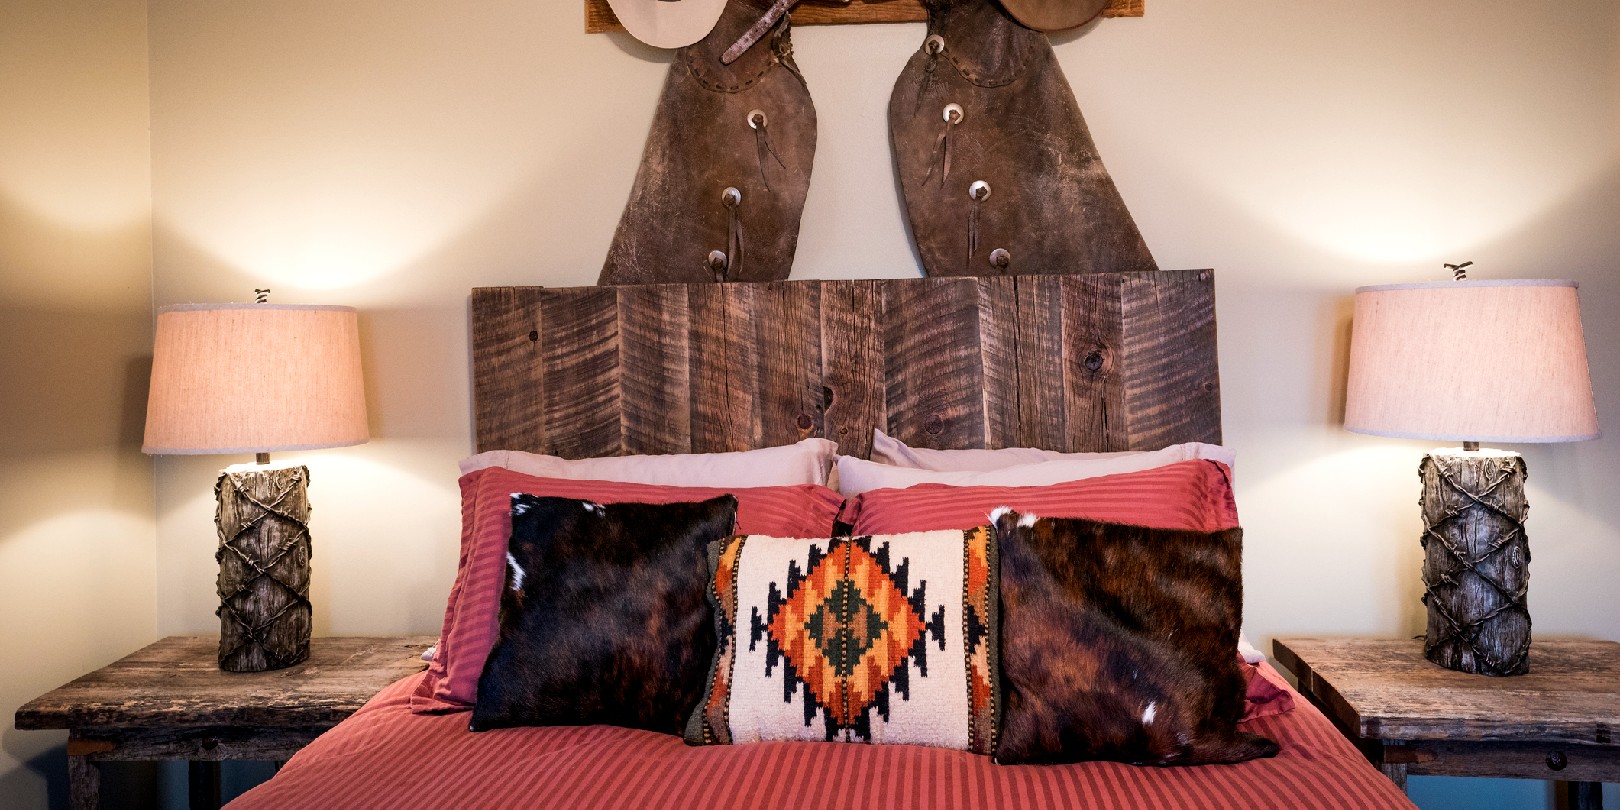 Western decor of bedroom at a ranch in Montana